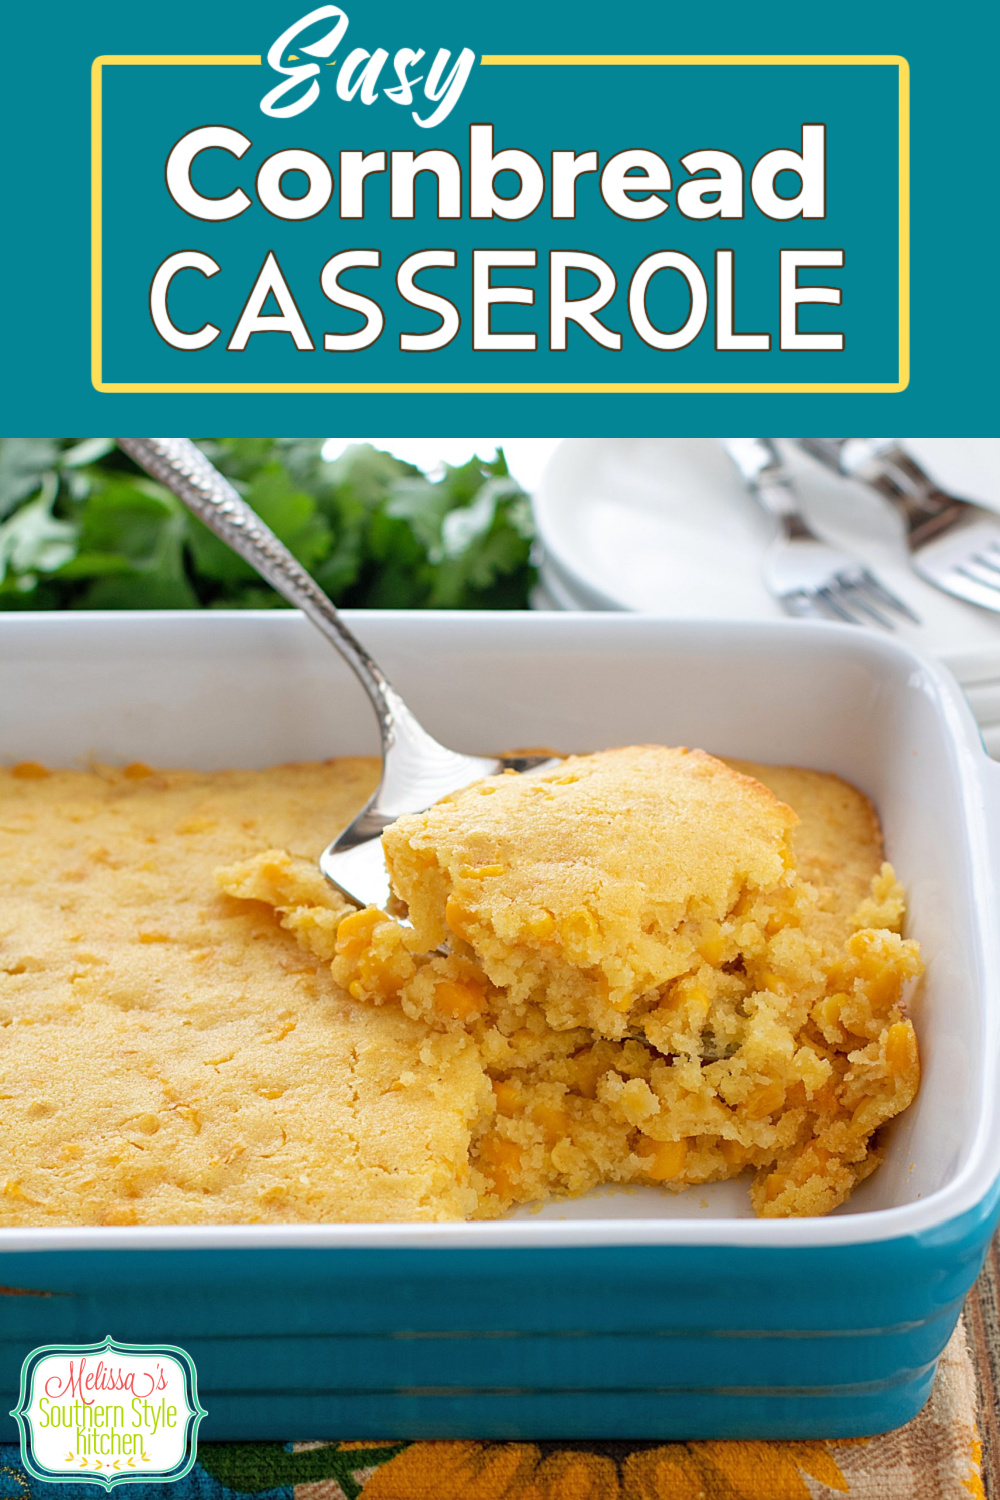 This six ingredient Easy Cornbread Casserole can be made in the oven or in a crockpot #corn #cornrecipes #cornbread #easycornbreadcasserole #southerncornbreadrecipes #howtomakecornbread #corncasserole #jiffymuffinmix via @melissasssk